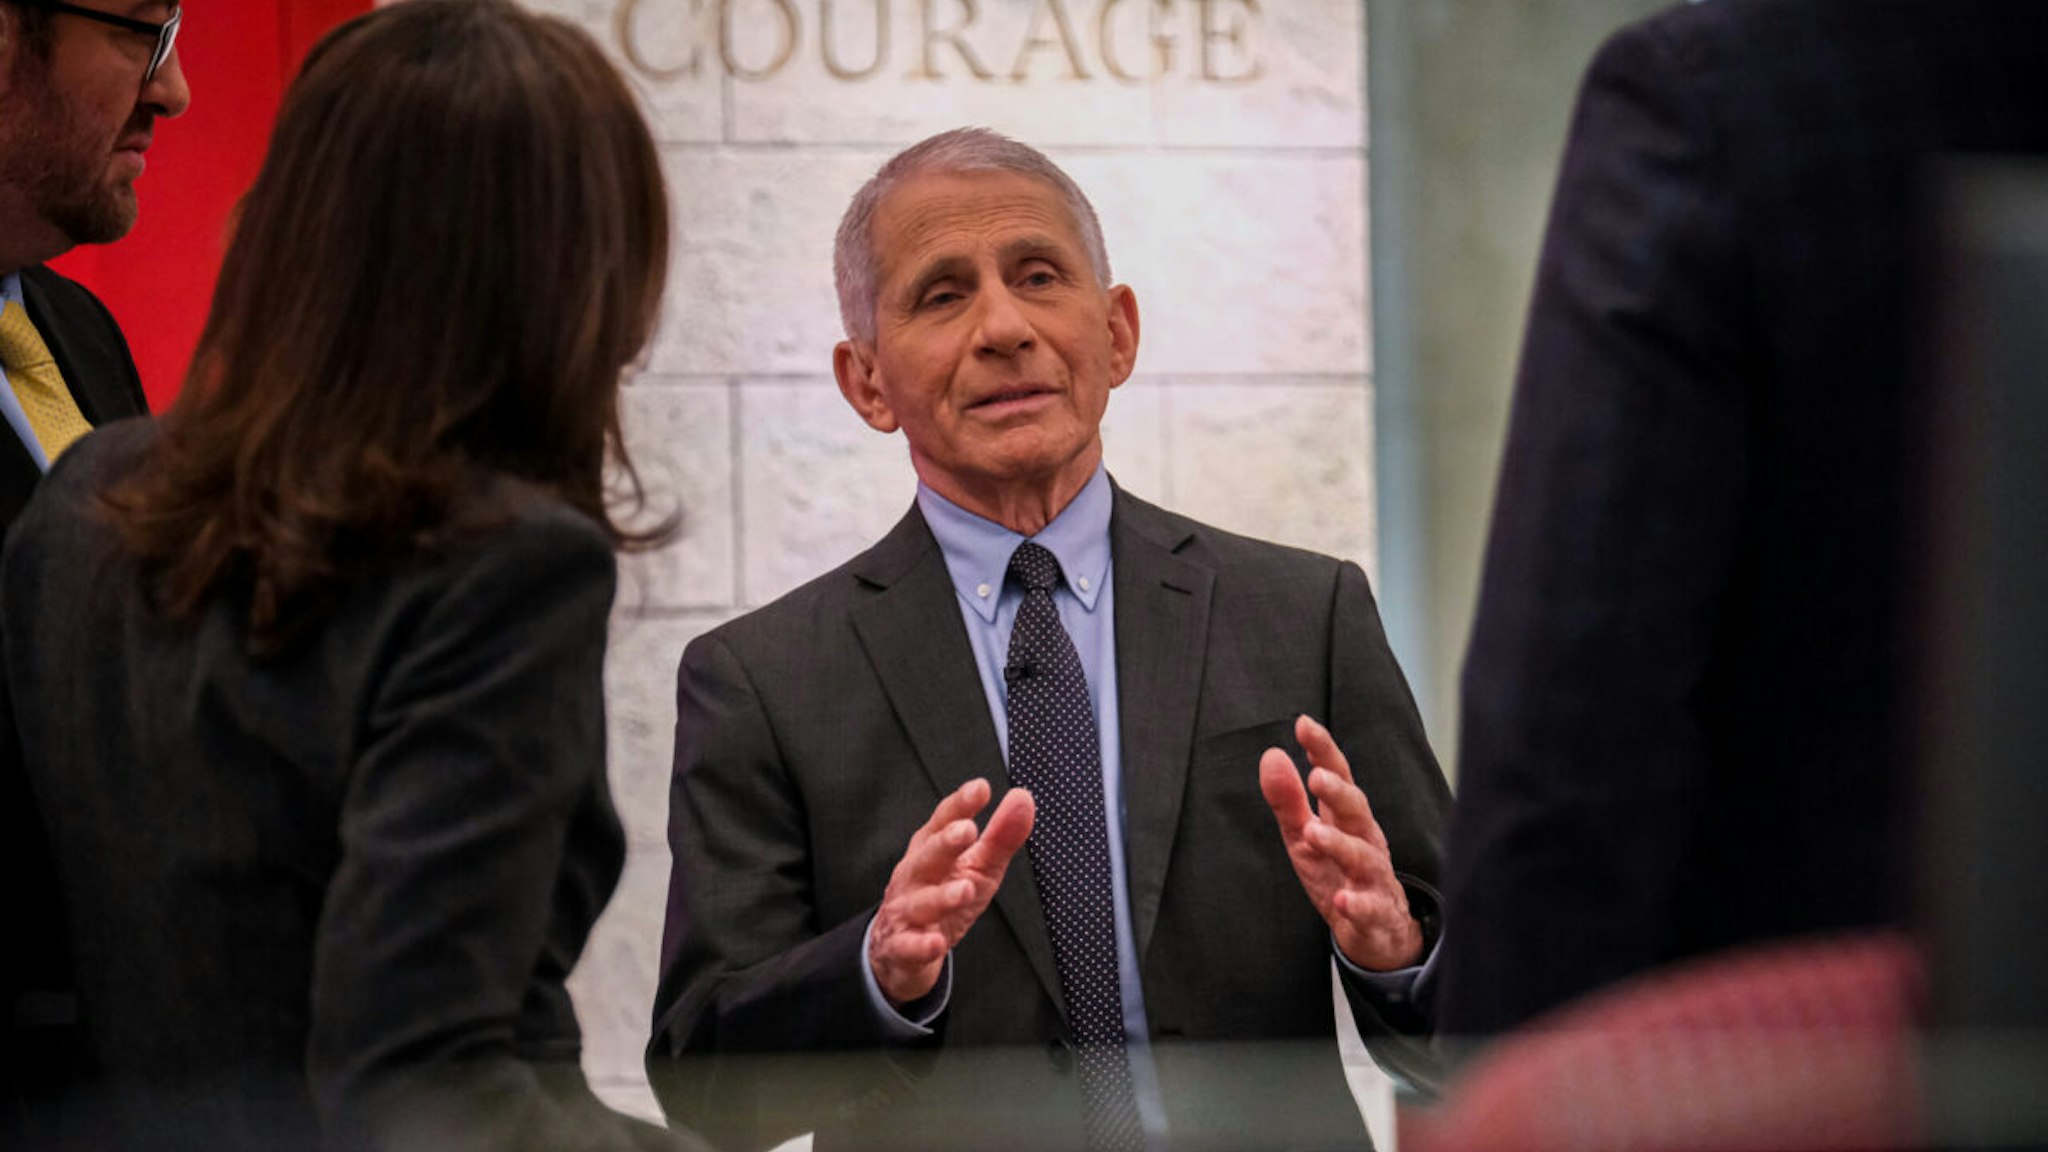 Dr. Anthony Fauci appears on Meet the Press in Washington, D.C. Sunday, Nov. 27, 2022.